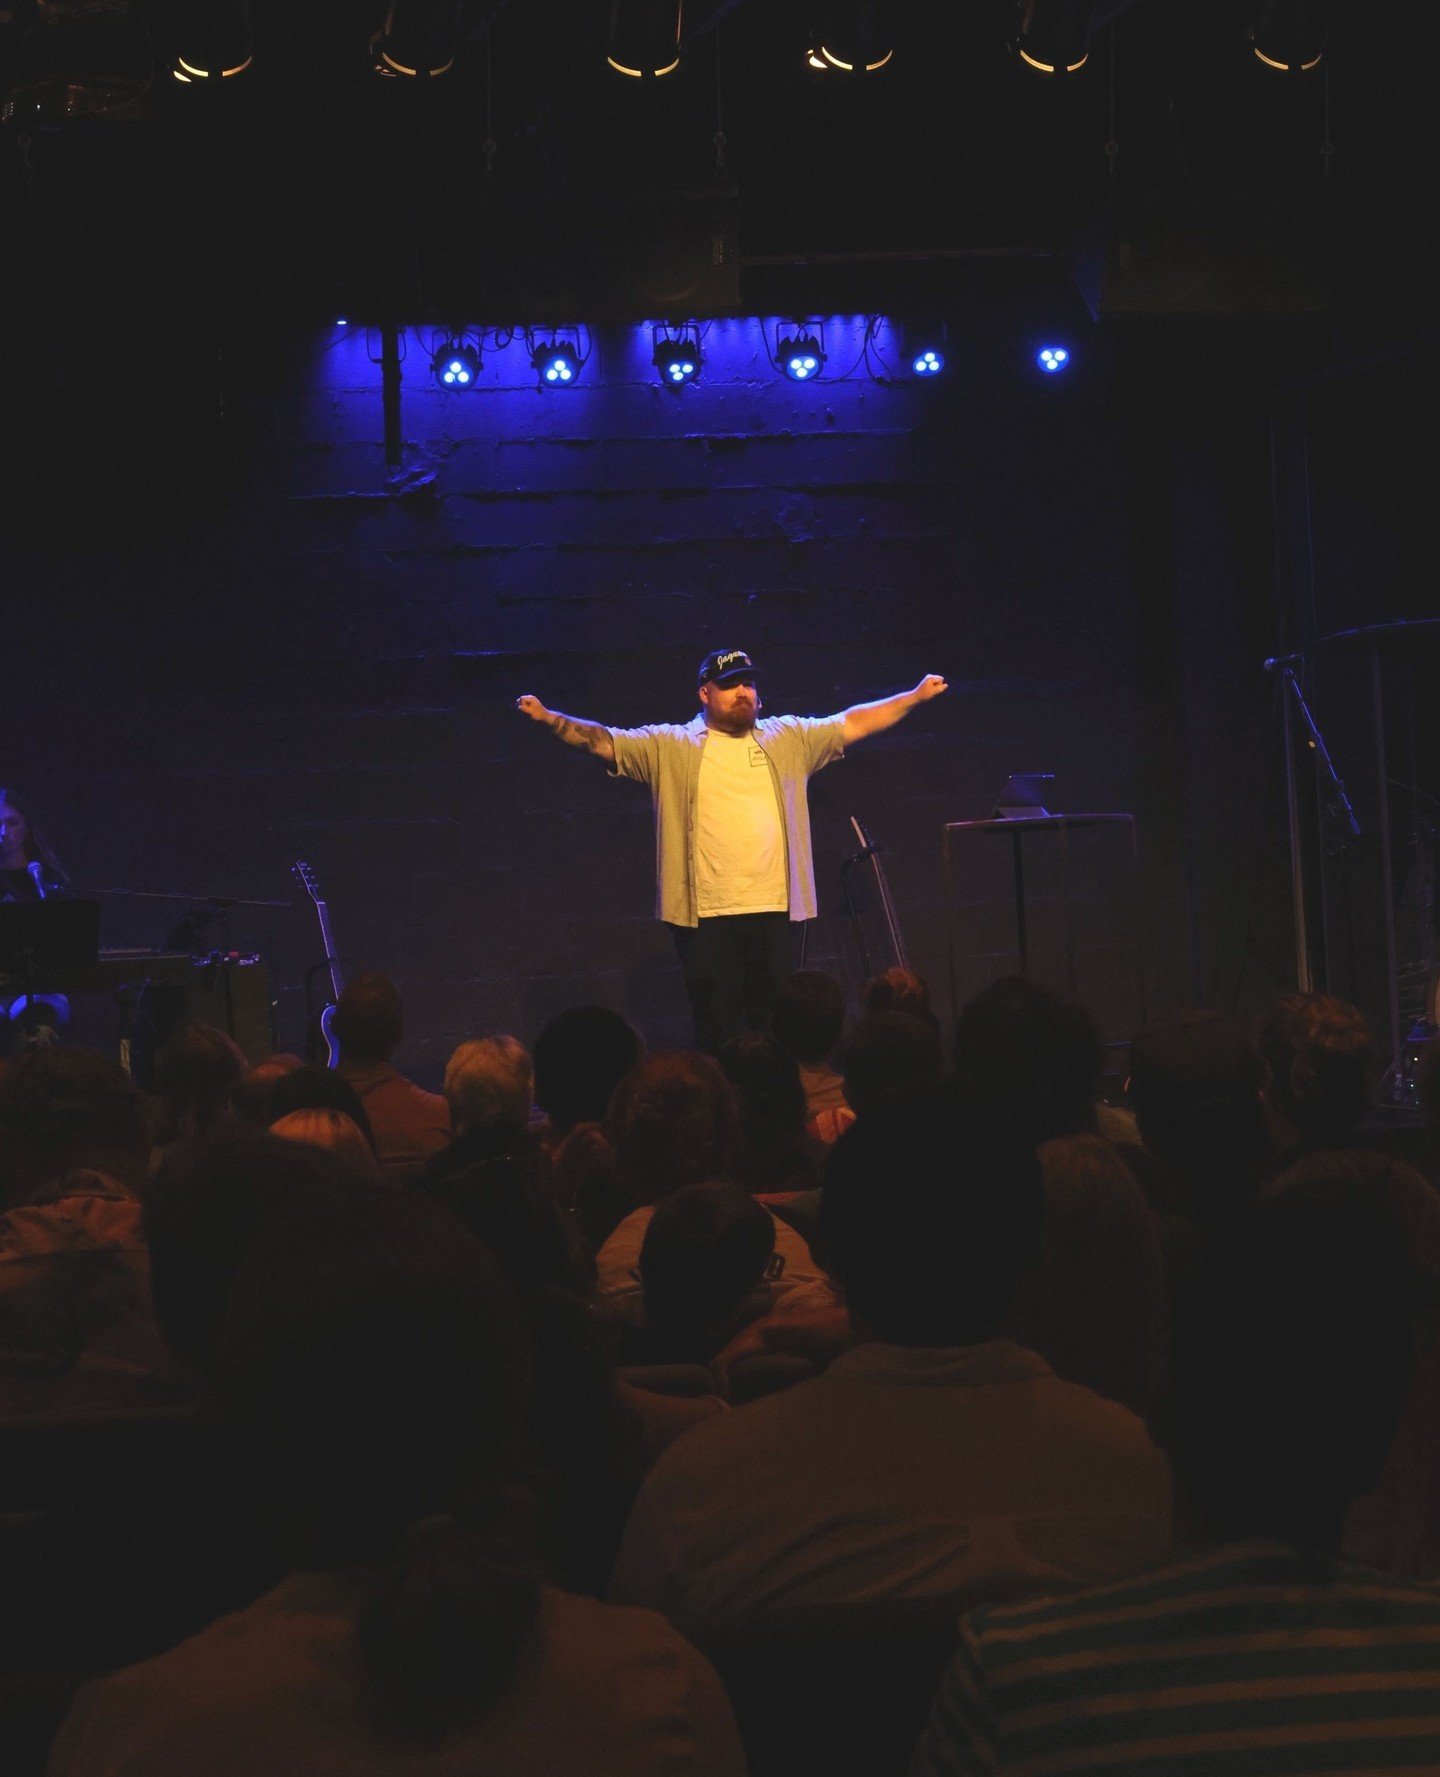 We had the privilege of hearing from our Director of Worship, Austin Crockett, this Sunday. He shared his story + what God has revealed to him through hard seasons. His talk, The Search is Over, is up on our website + YouTube now!